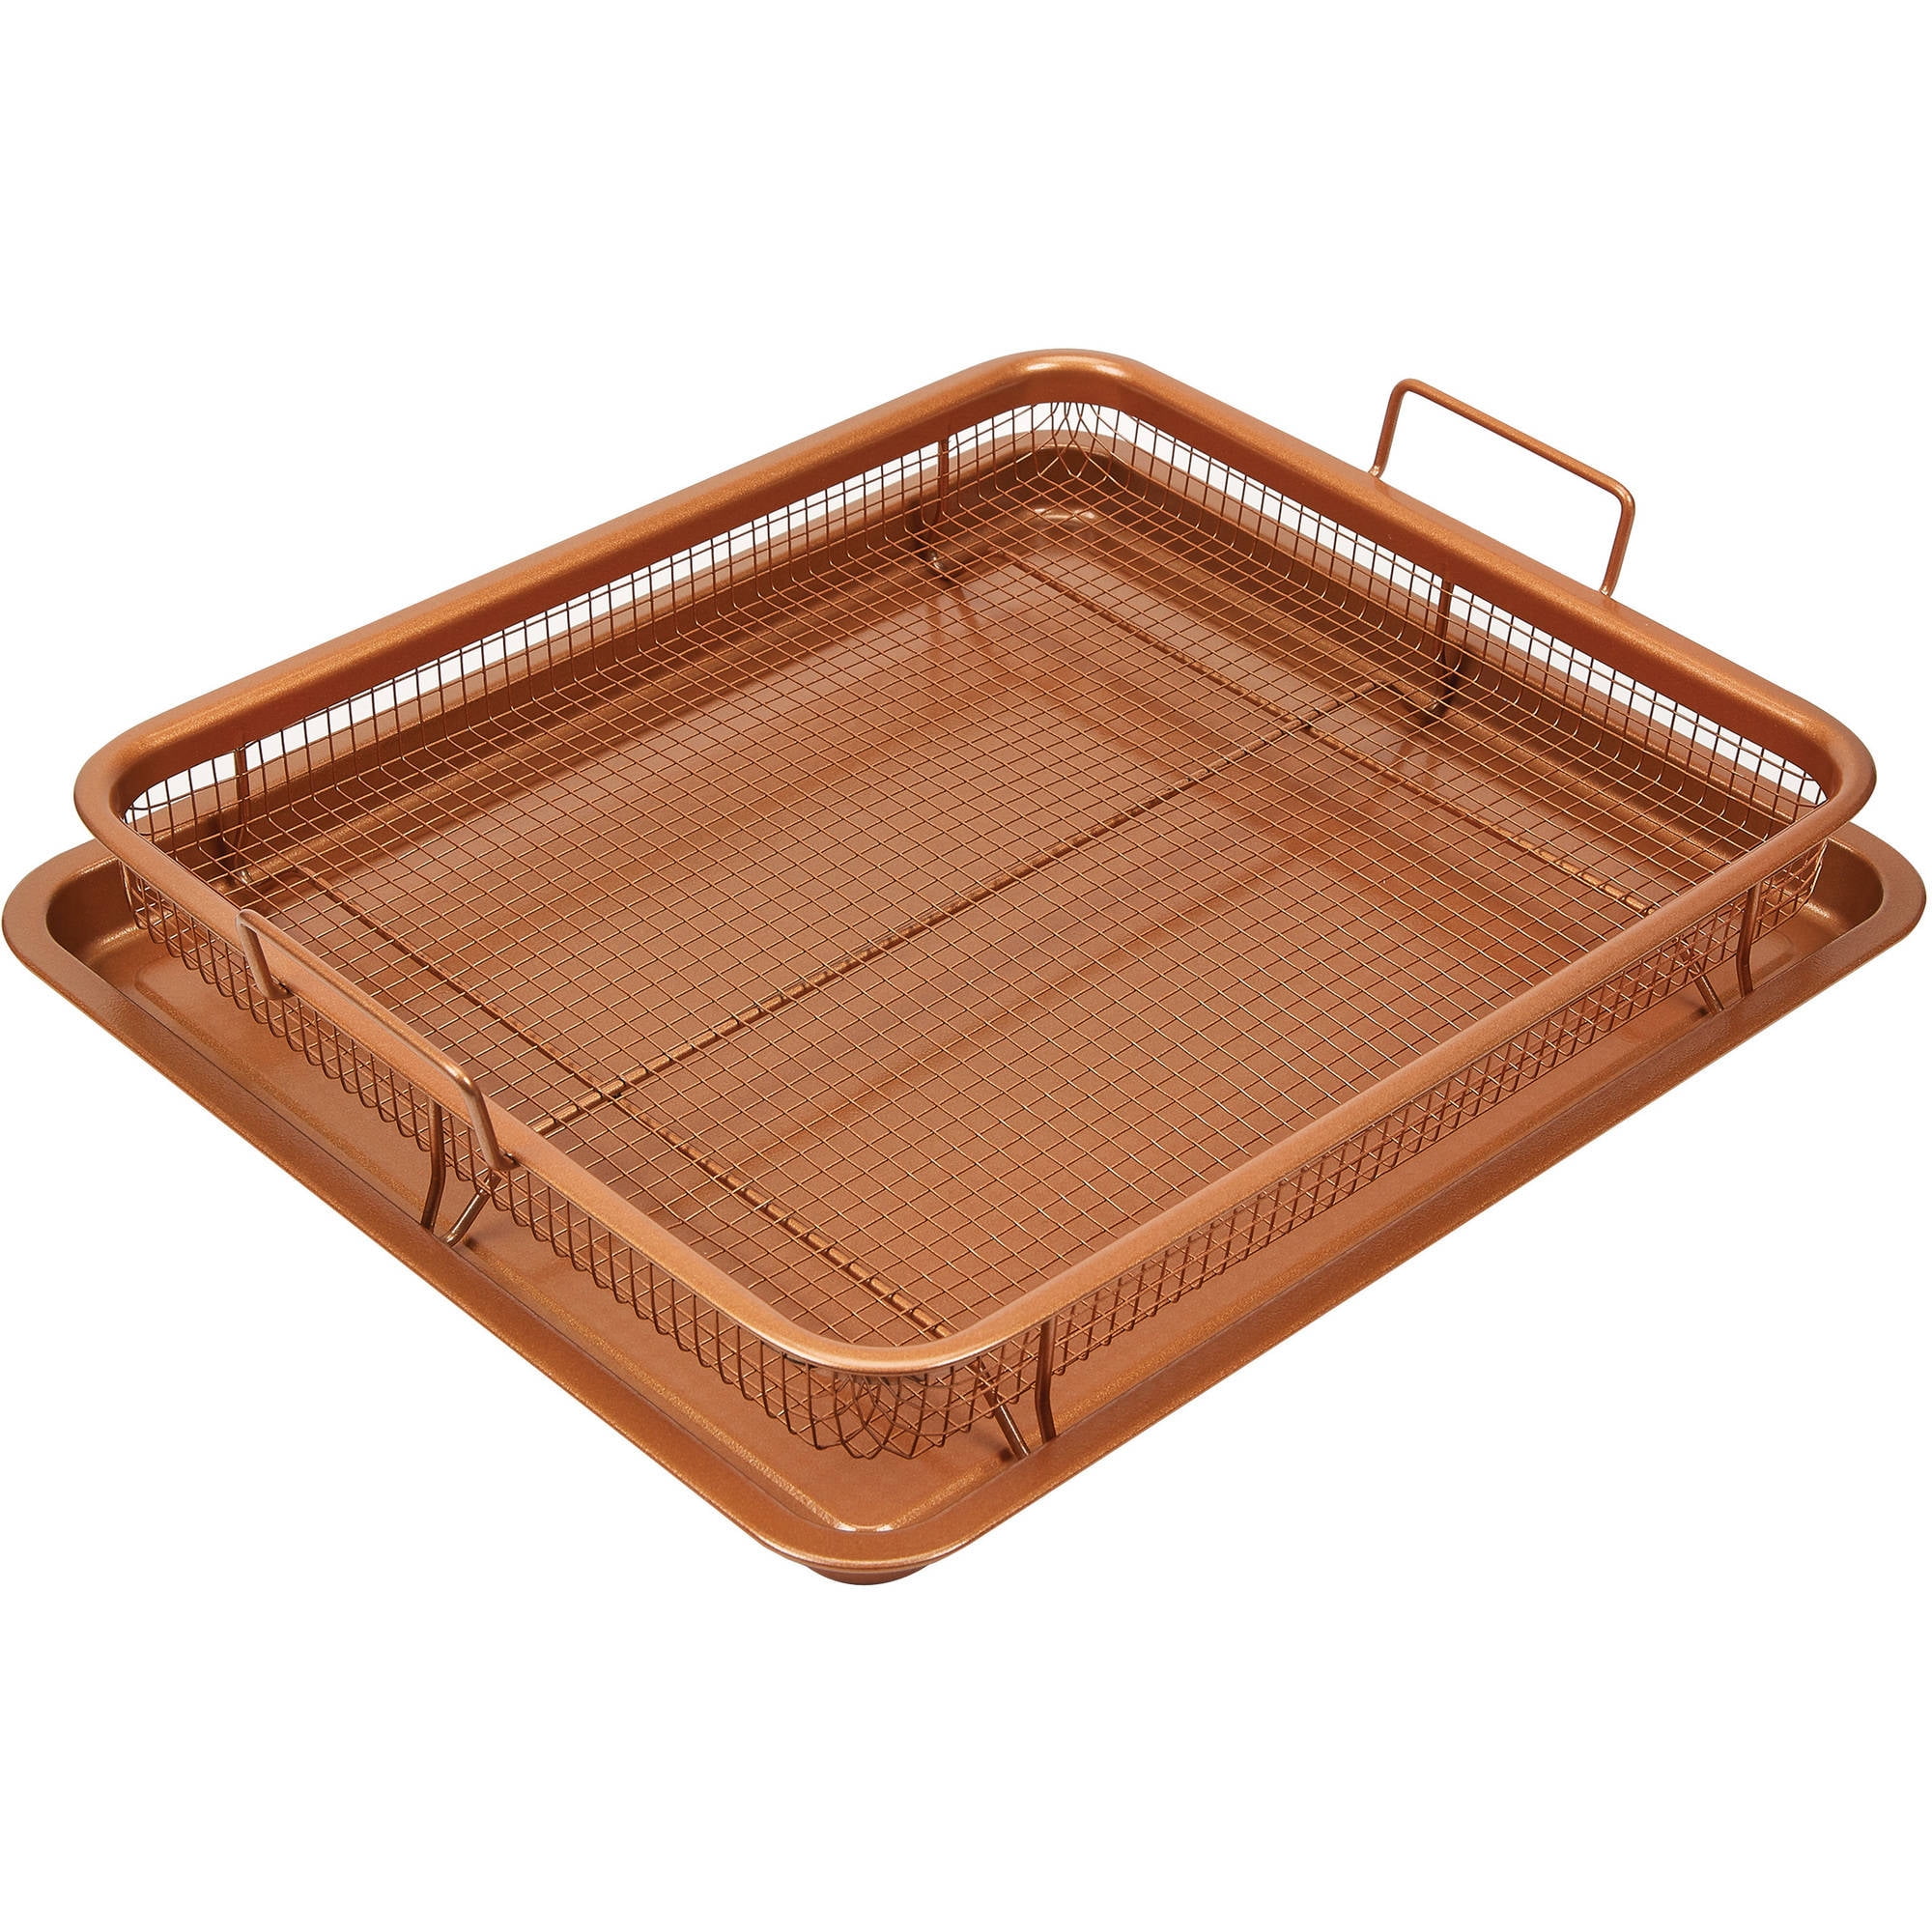 13 Inch Food Copper Plated Crisper Tray Cook Innovations Oven